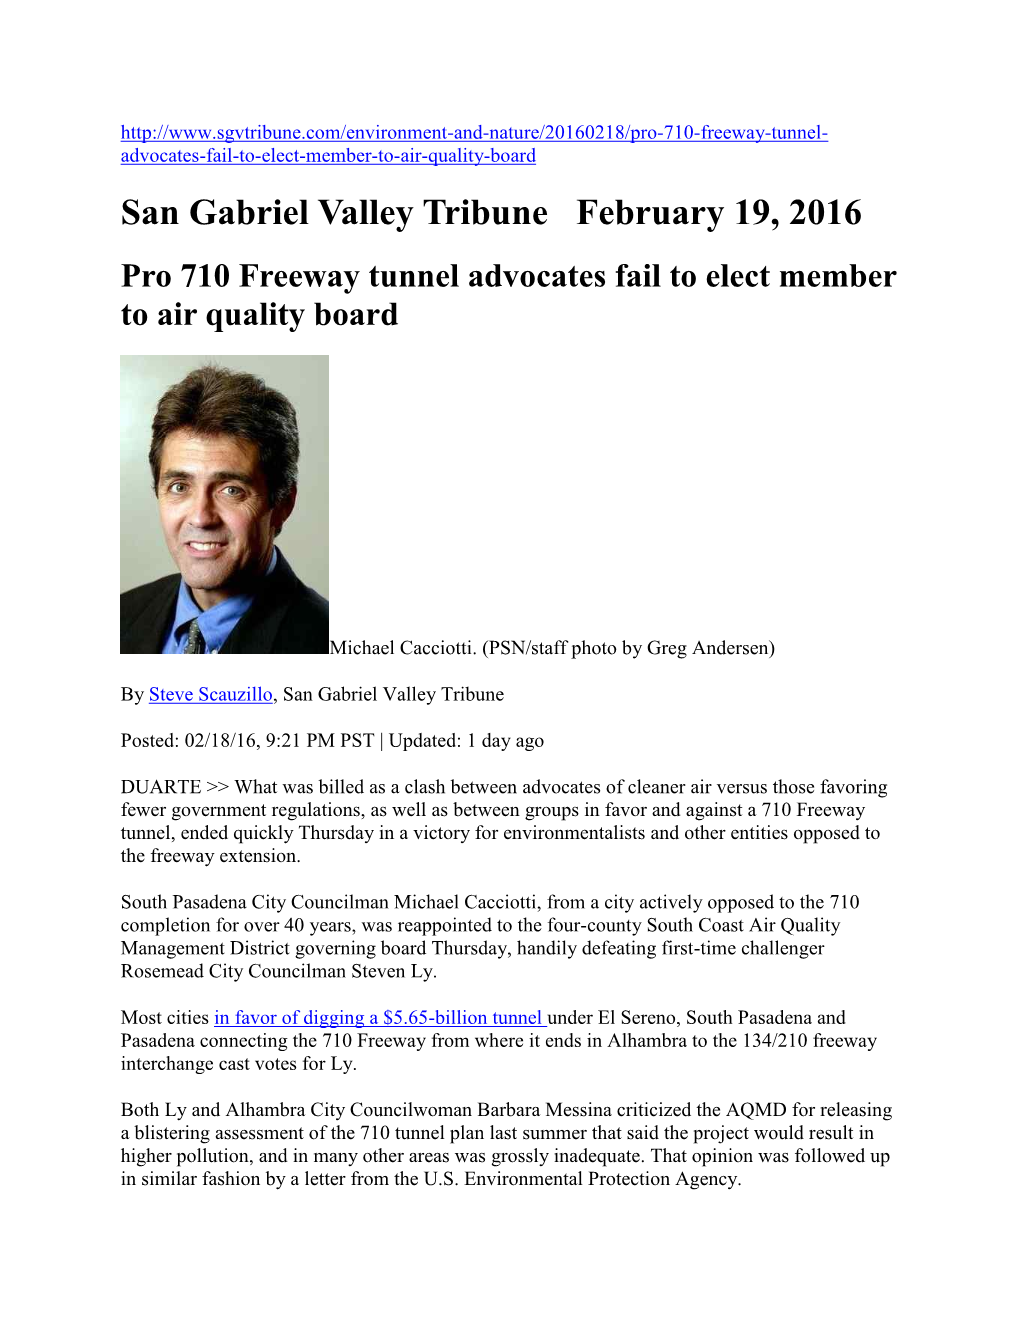 San Gabriel Valley Tribune February 19, 2016 Pro 710 Freeway Tunnel Advocates Fail to Elect Member to Air Quality Board